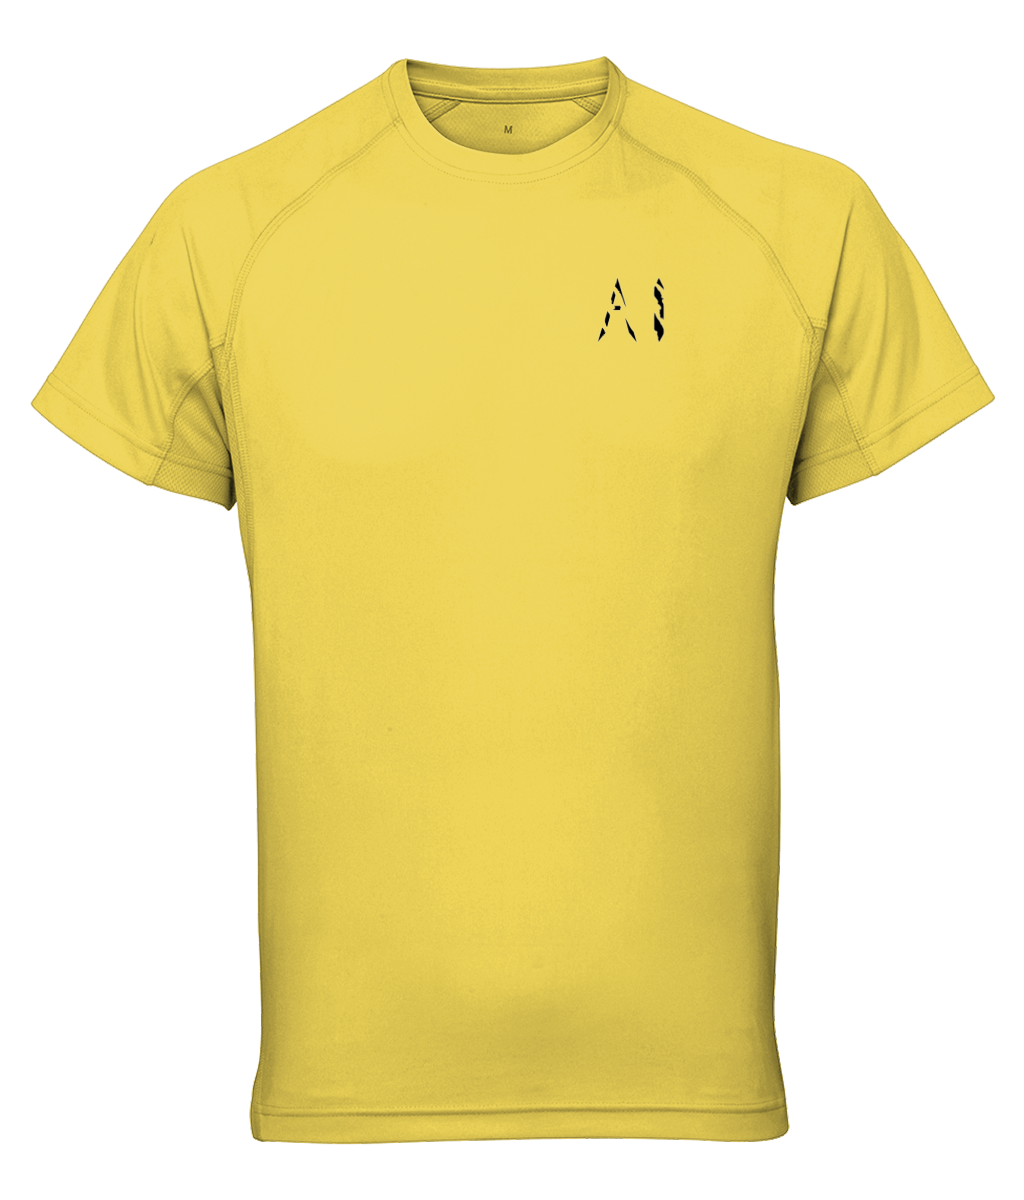 Mens yellow Athletic Performance Top with black AI logo on the left chest